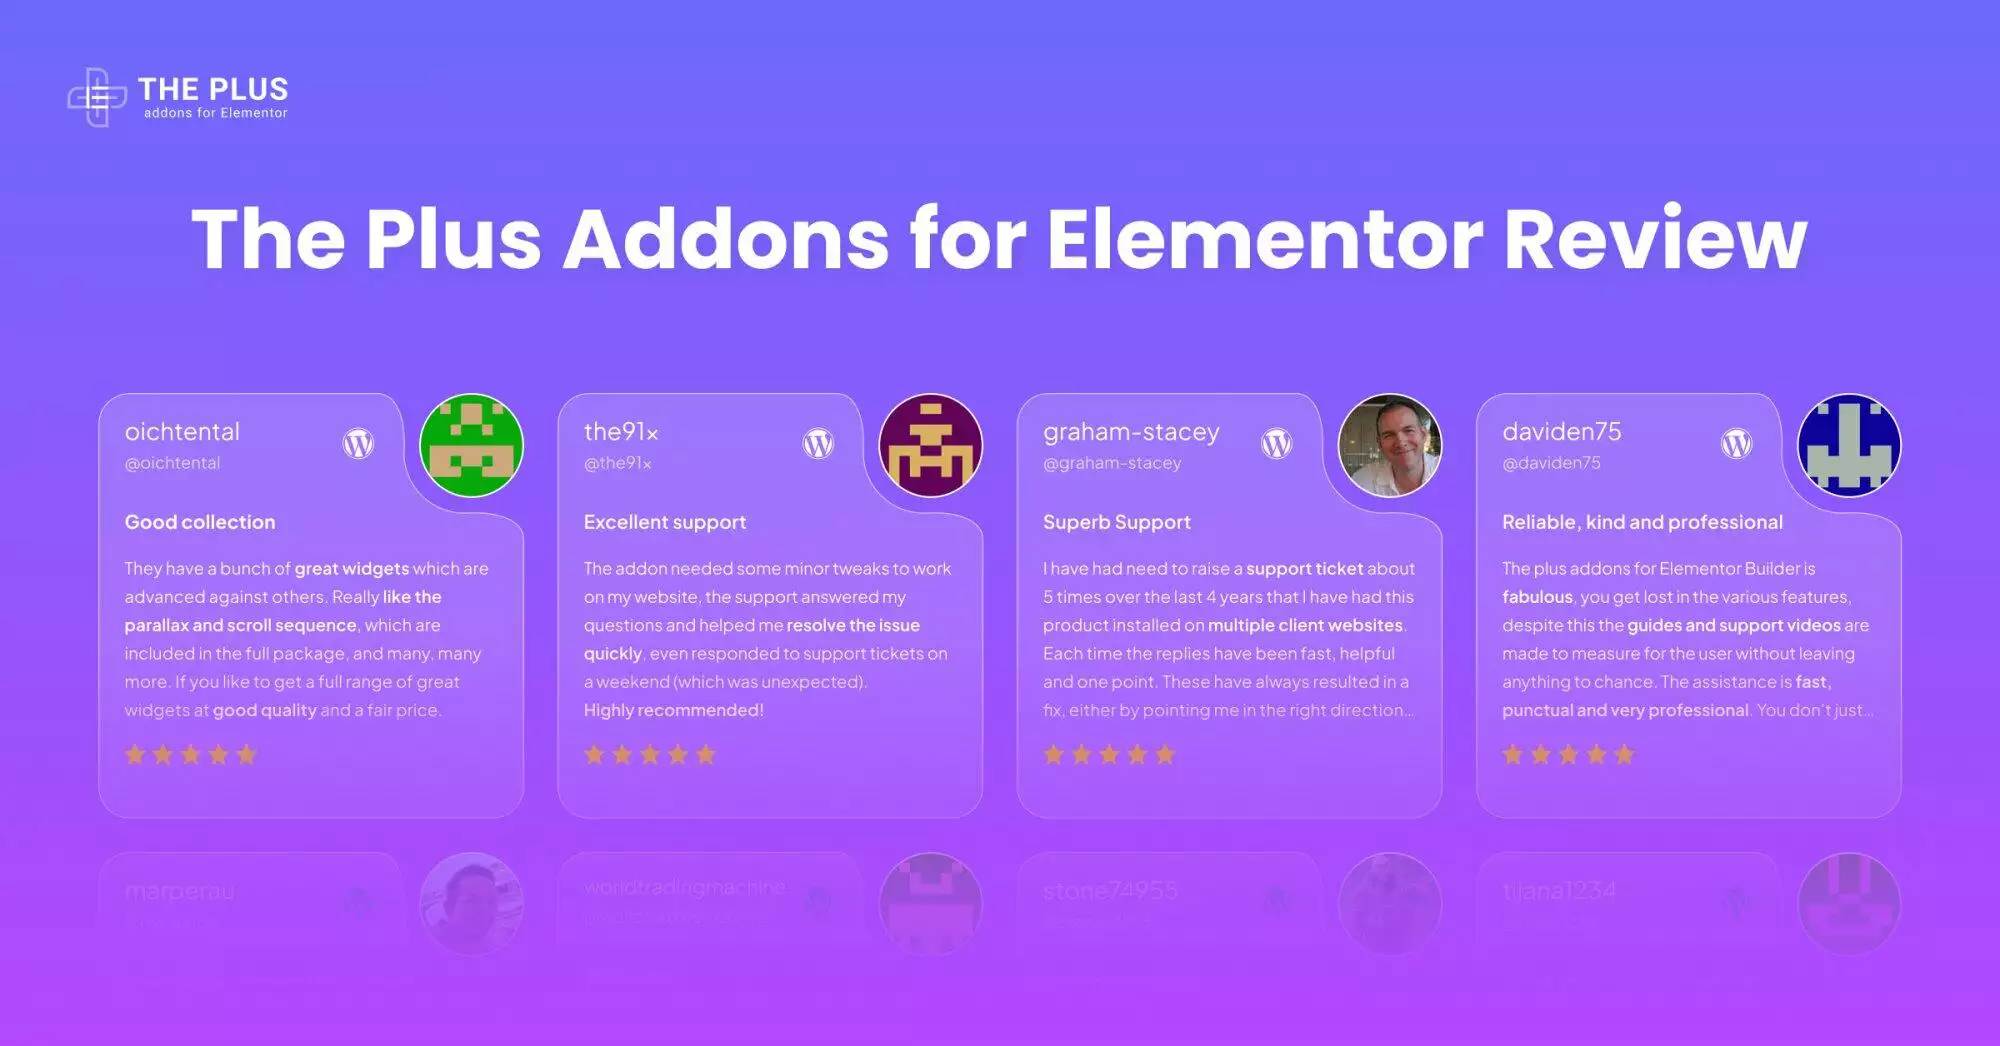 The plus addons for elementor review final the plus addons for elementor review from the plus addons for elementor